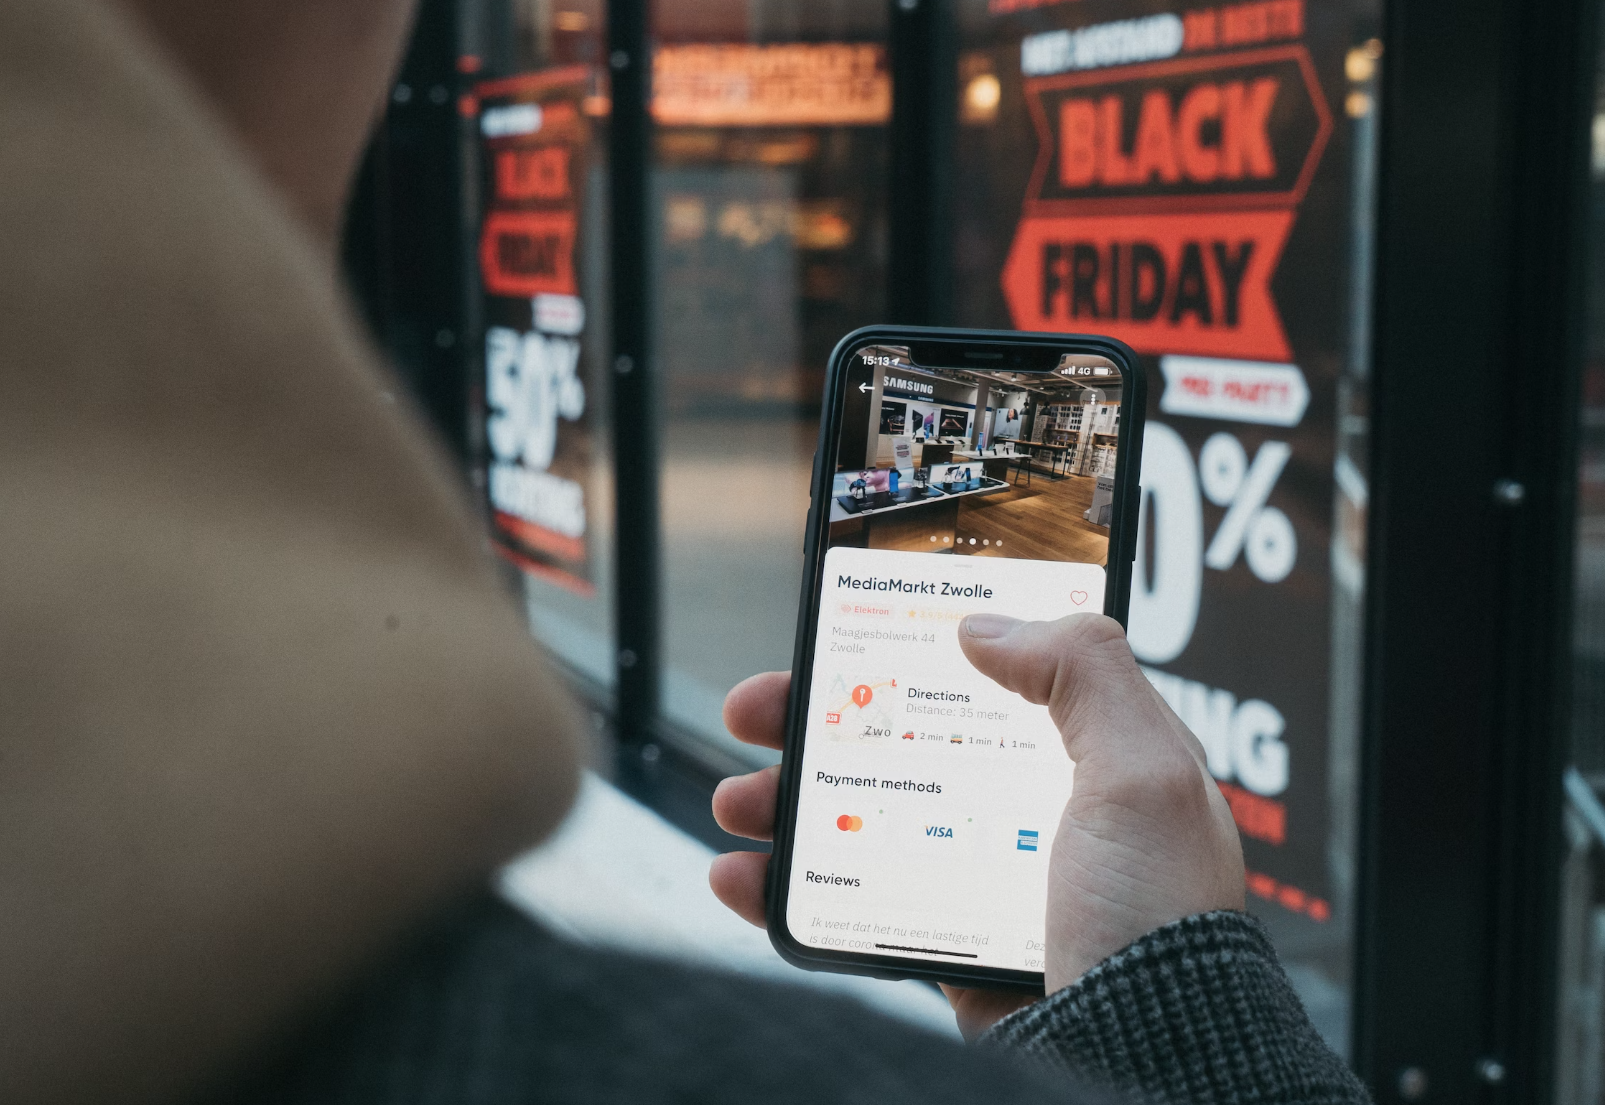 Are consumers wrong about Black Friday deals?